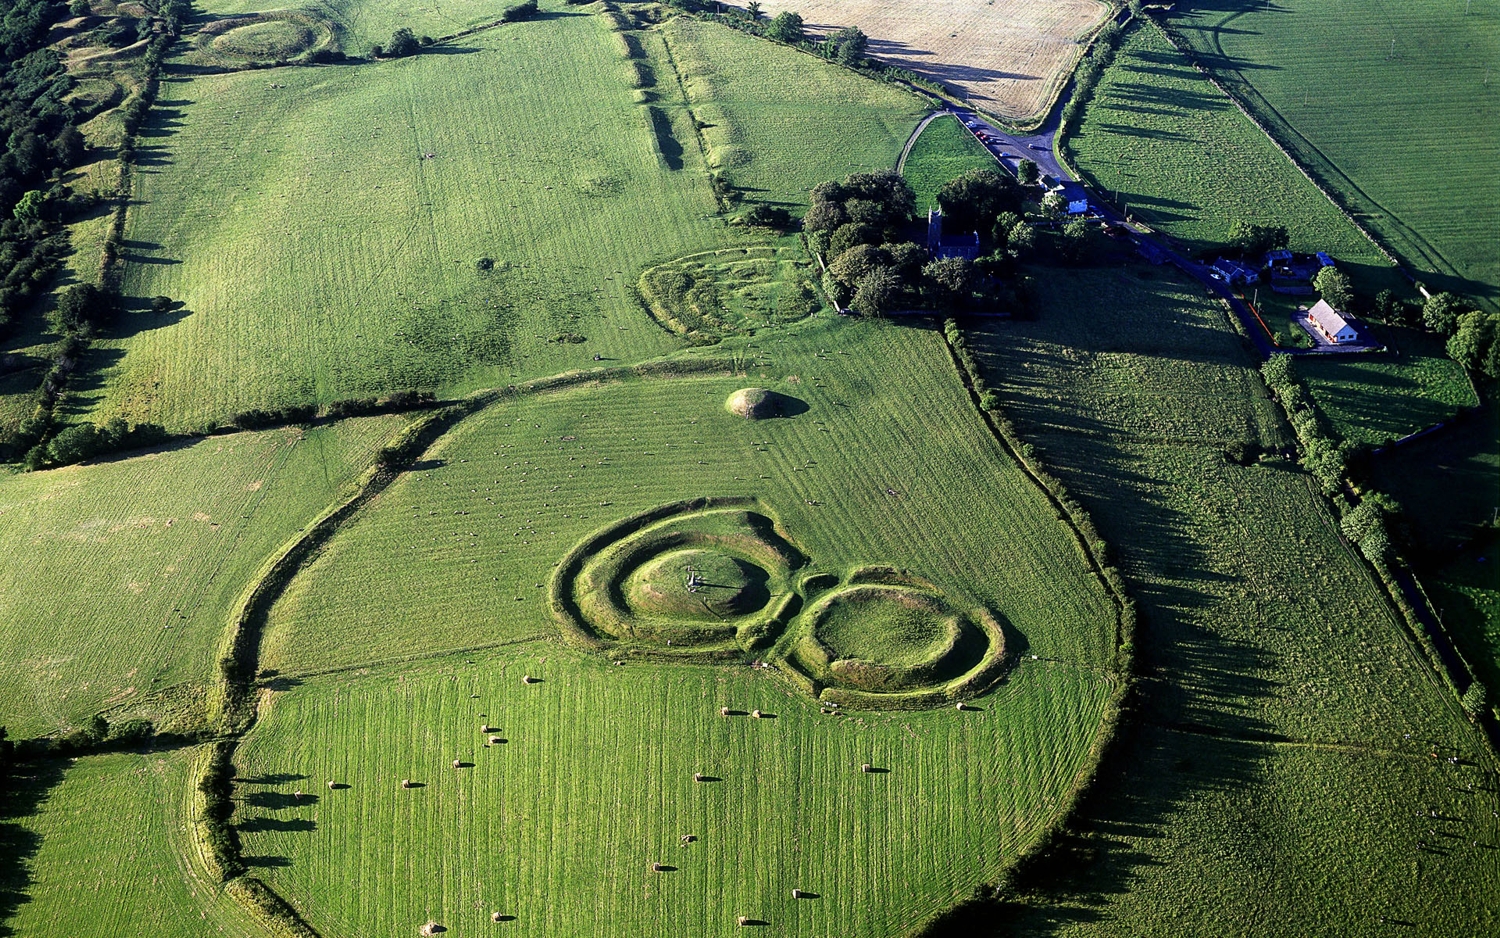 Round earthworks at the hill of tara county meath Leinster Ireland